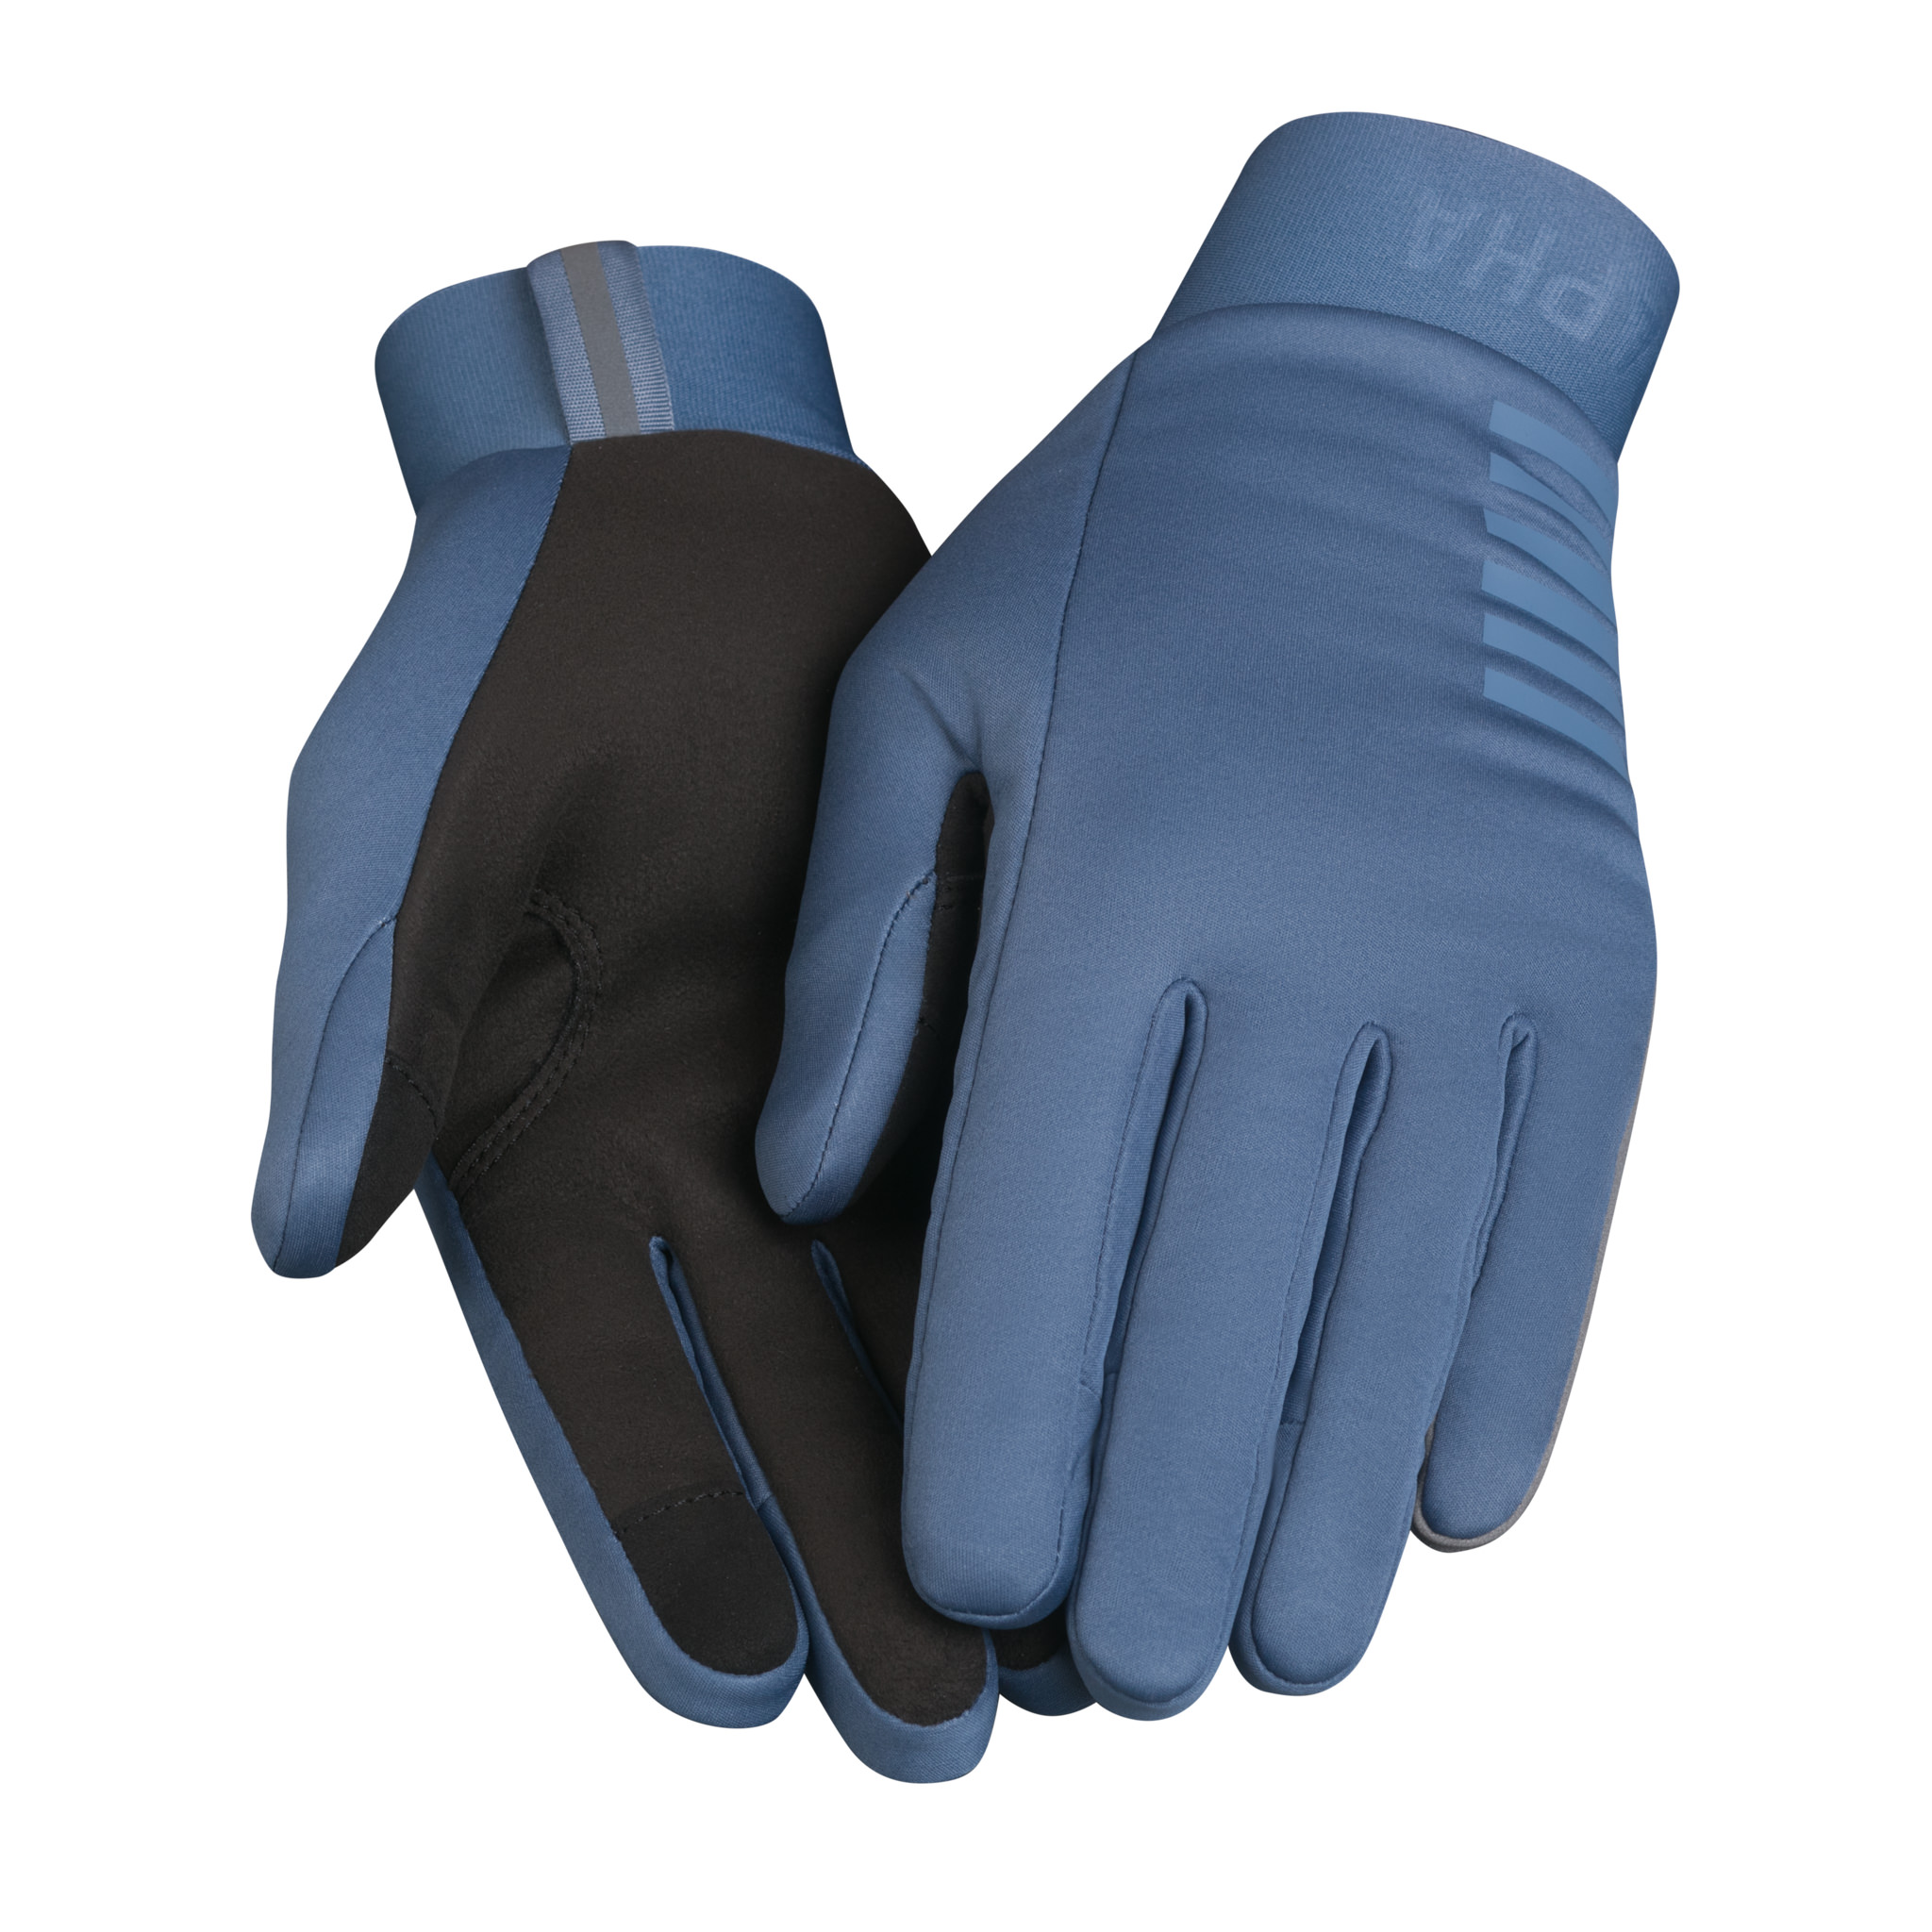 Pro Team Winter Gloves | Well Fitted Made For Racing In Cold Conditions | Rapha